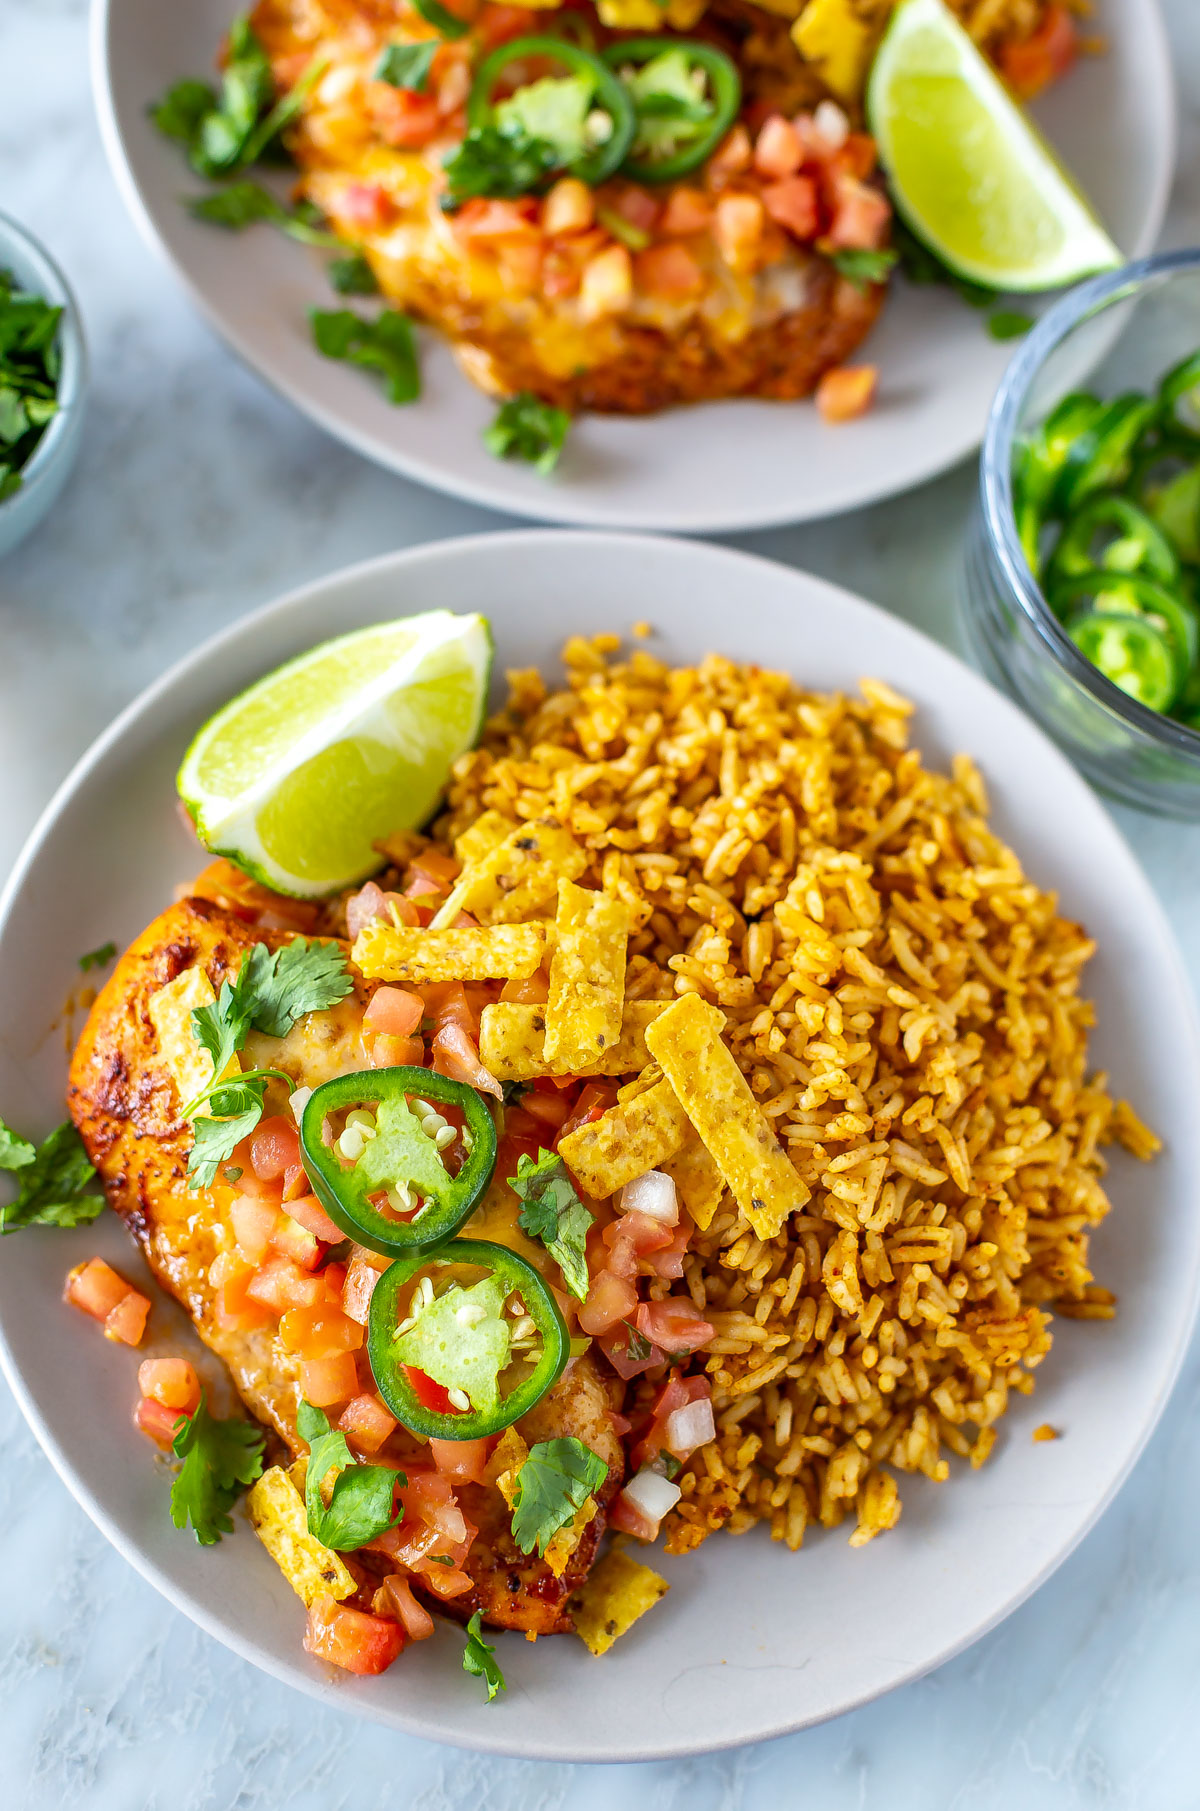 A plate of tequila lime chicken served alongside tex mex rice.